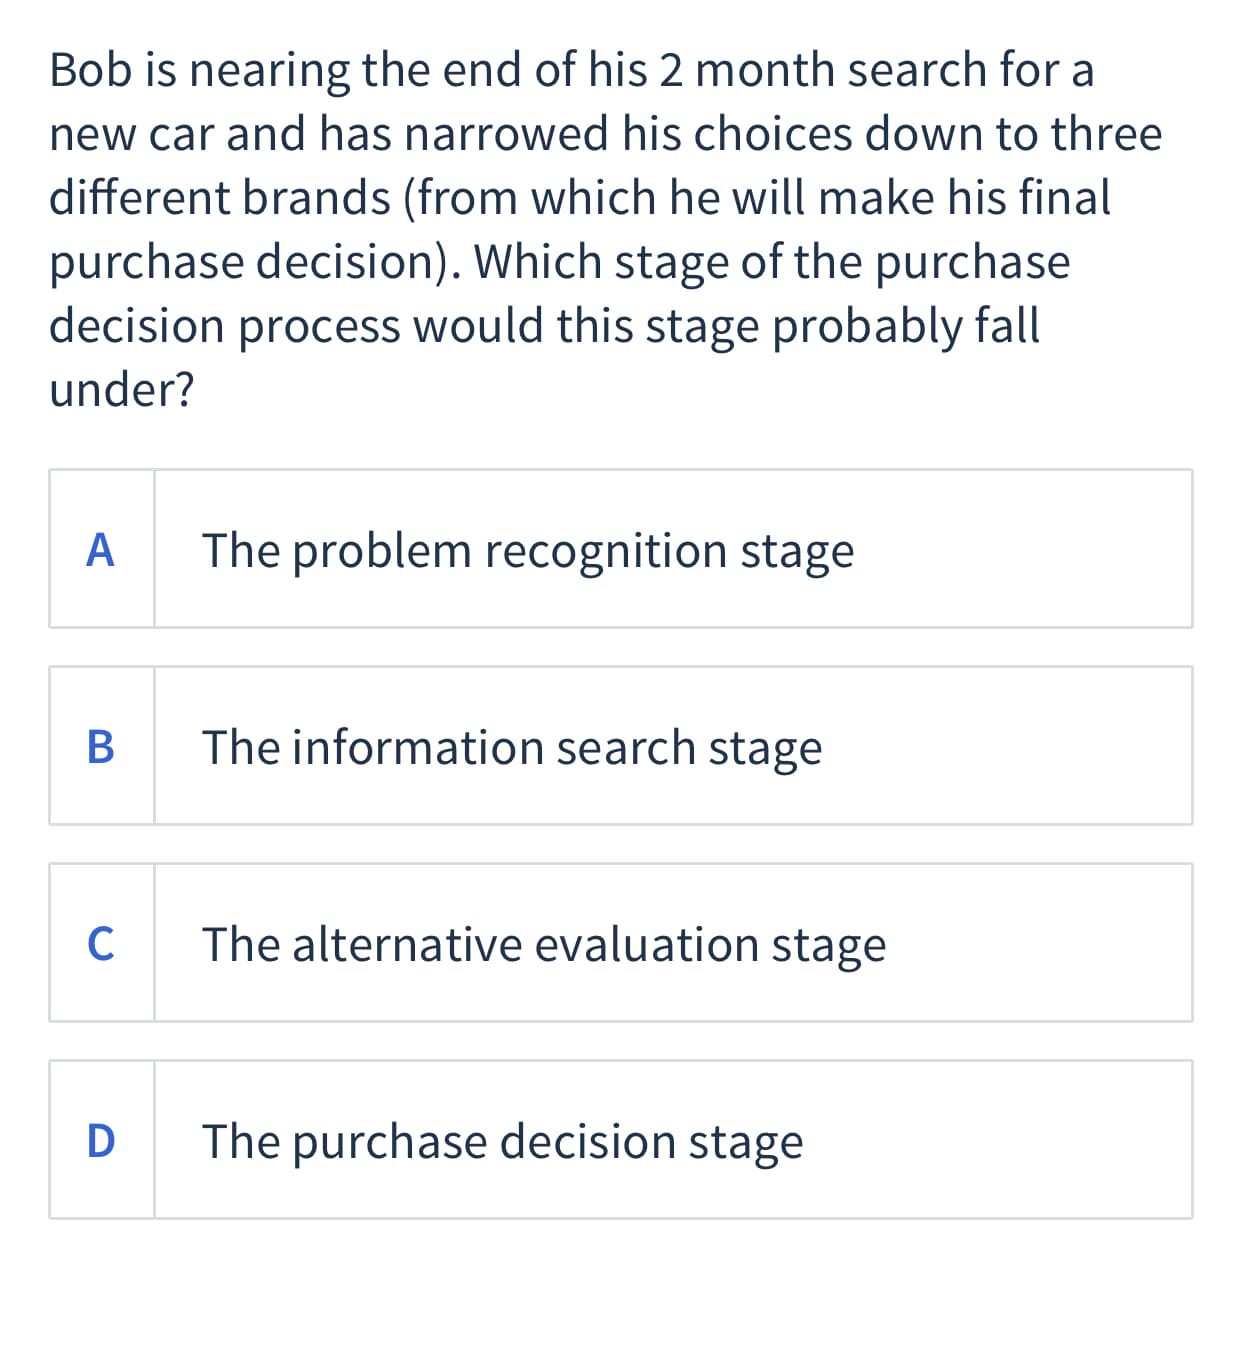 Bob is nearing the end of his 2 month search for a
new car and has narrowed his choices down to three
different brands (from which he will make his final
purchase decision). Which stage of the purchase
decision process would this stage probably fall
under?
A
The problem recognition stage
The information search stage
C
The alternative evaluation stage
D
The purchase decision stage
